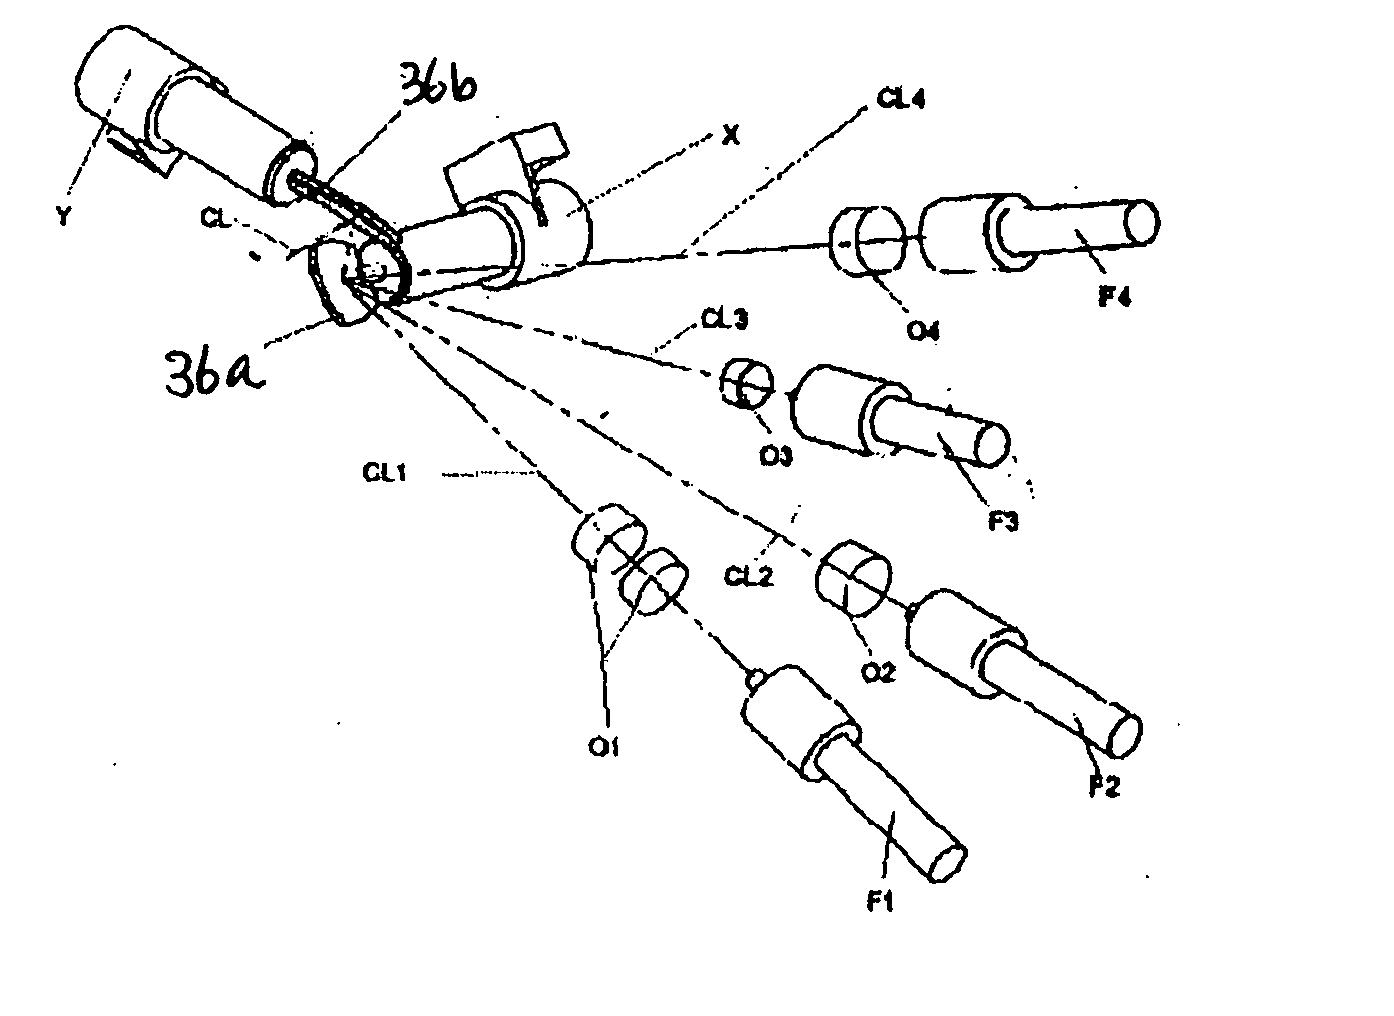 Optical delivery systems and methods of providing adjustable beam diameter, spot size and/or spot shape